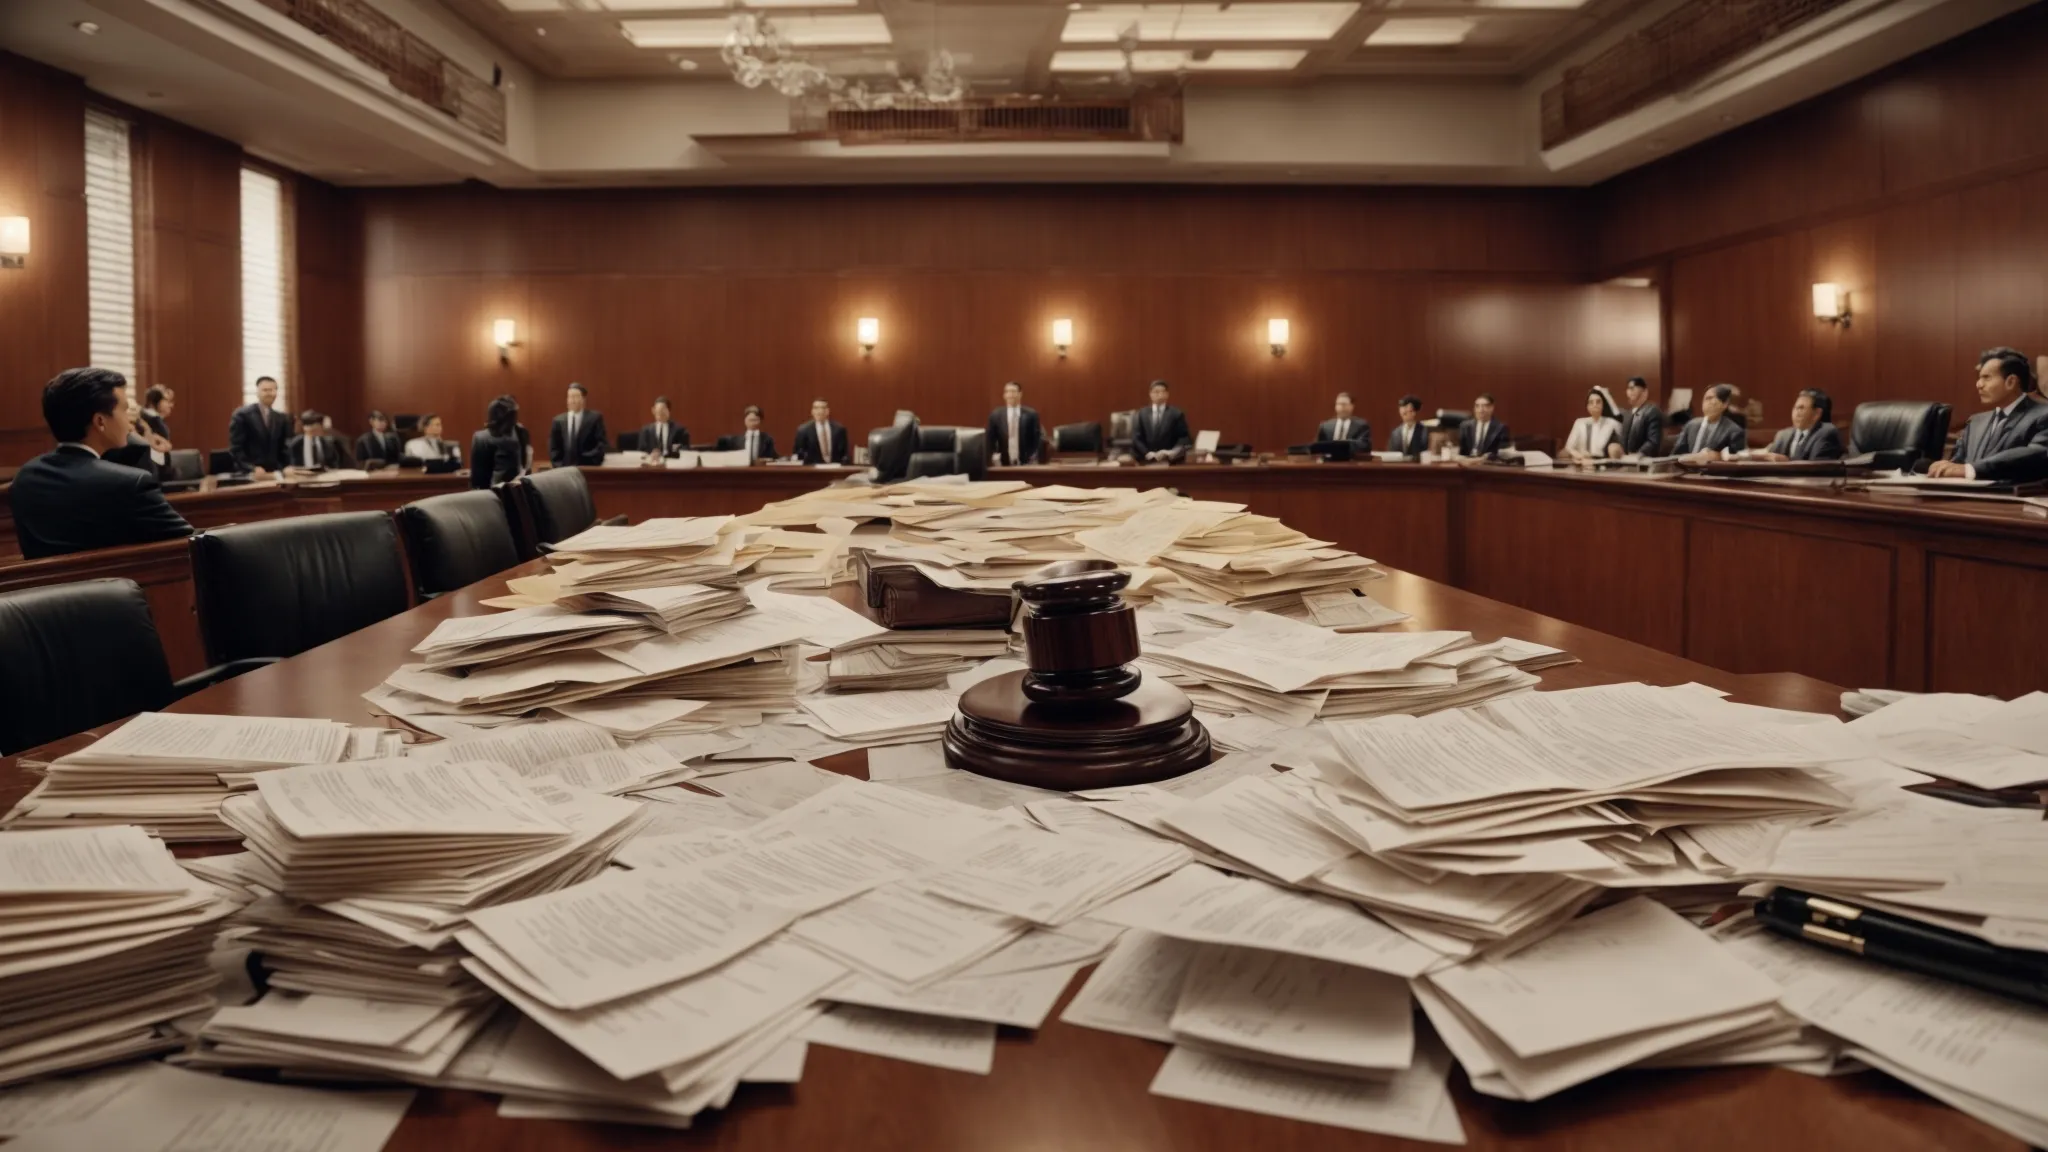 a chaotic courtroom with scattered legal documents and attorneys in mid-dispute, symbolizing the unpredictable nature of arbitration outcomes.